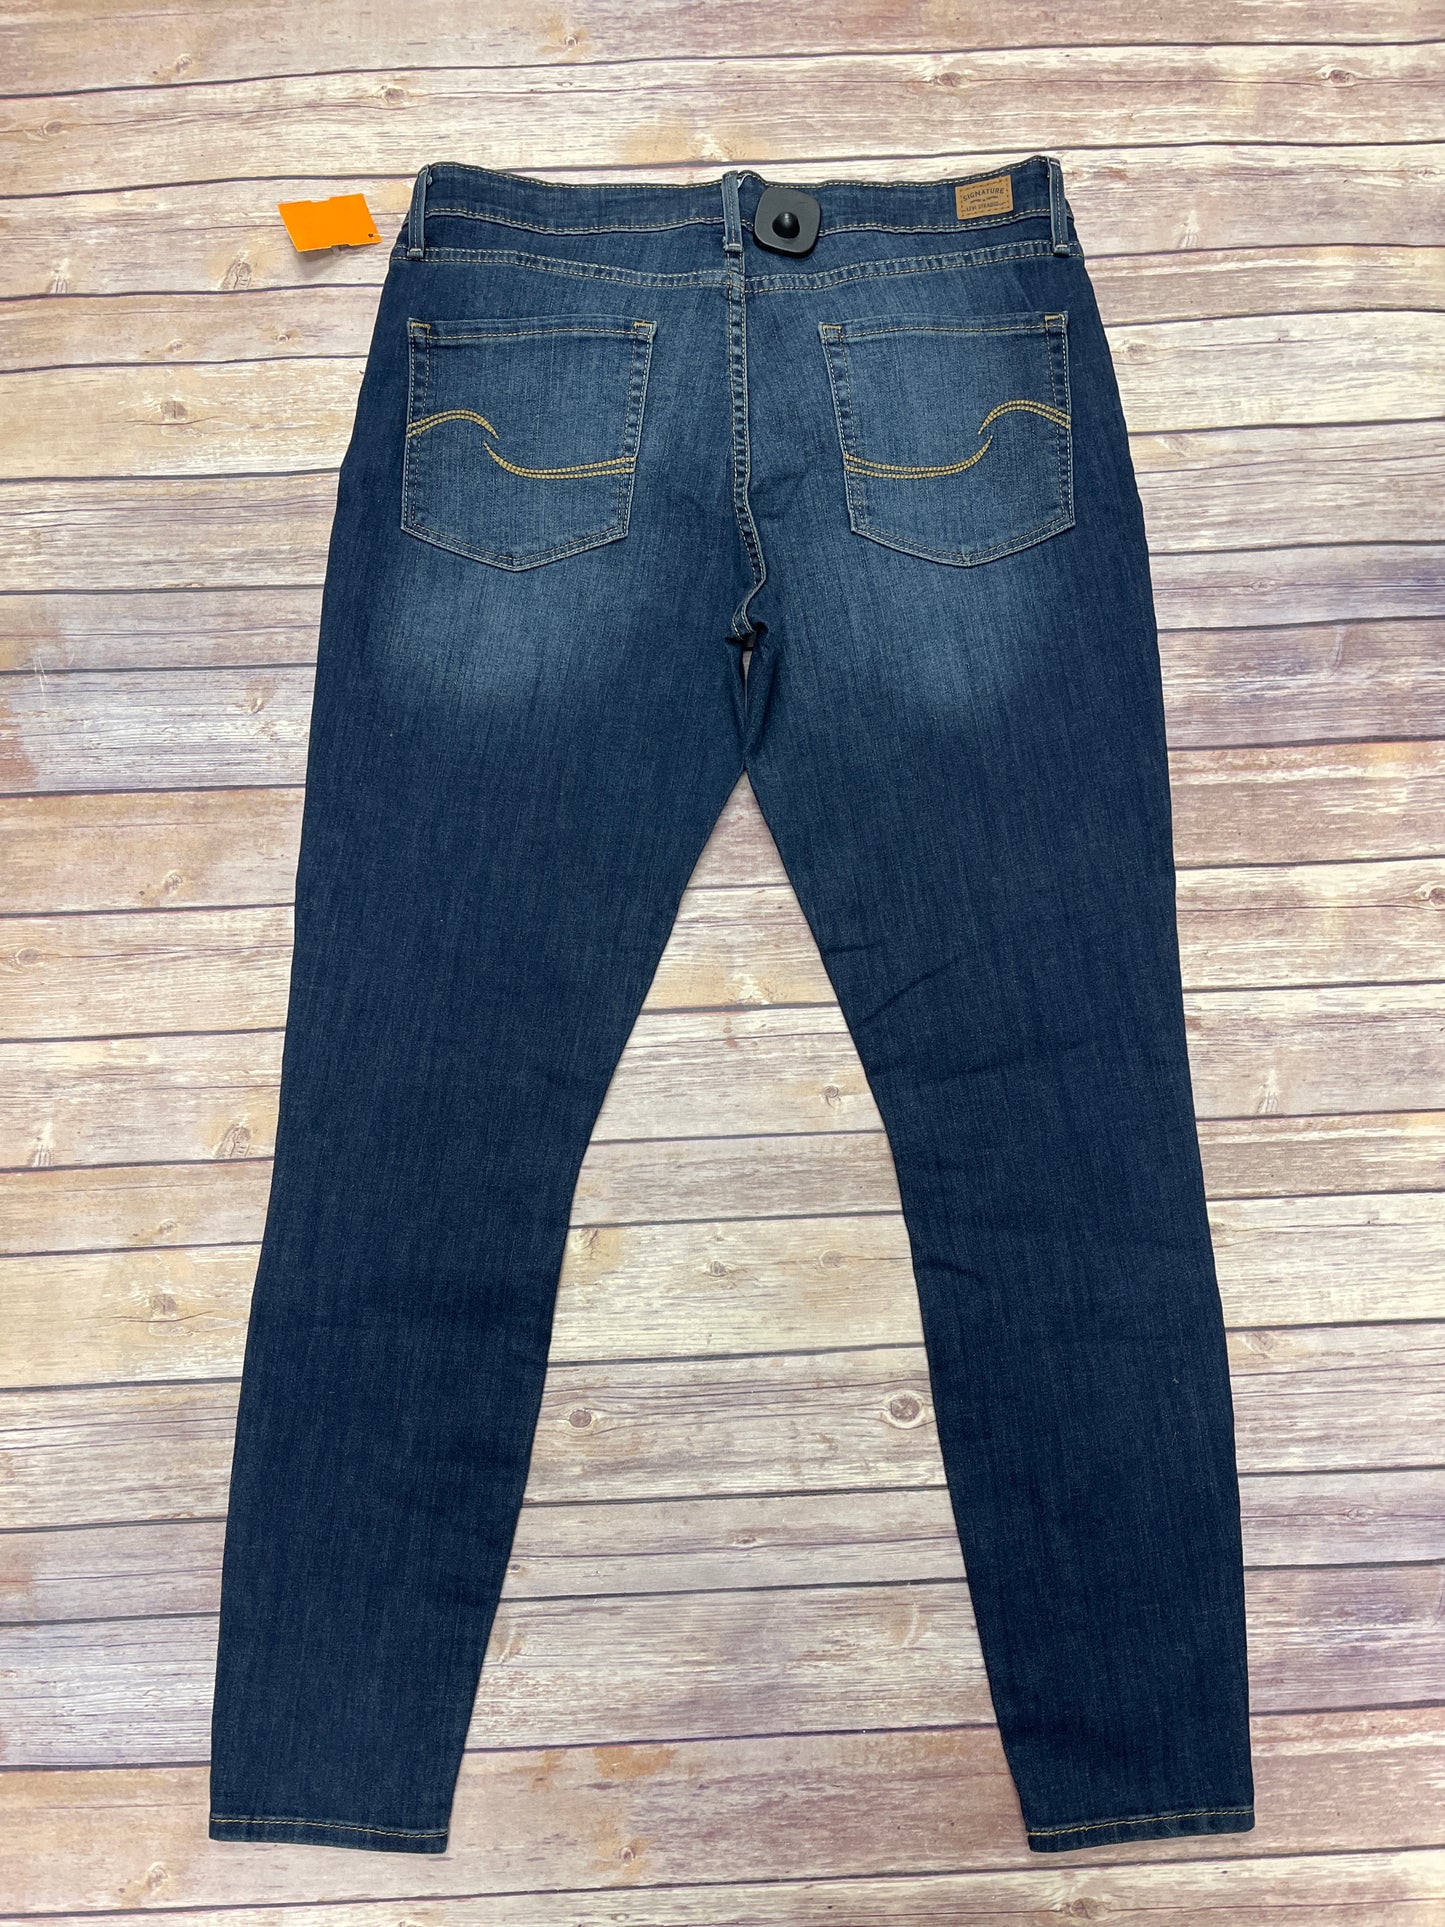 Jeans Skinny By Levis  Size: 14